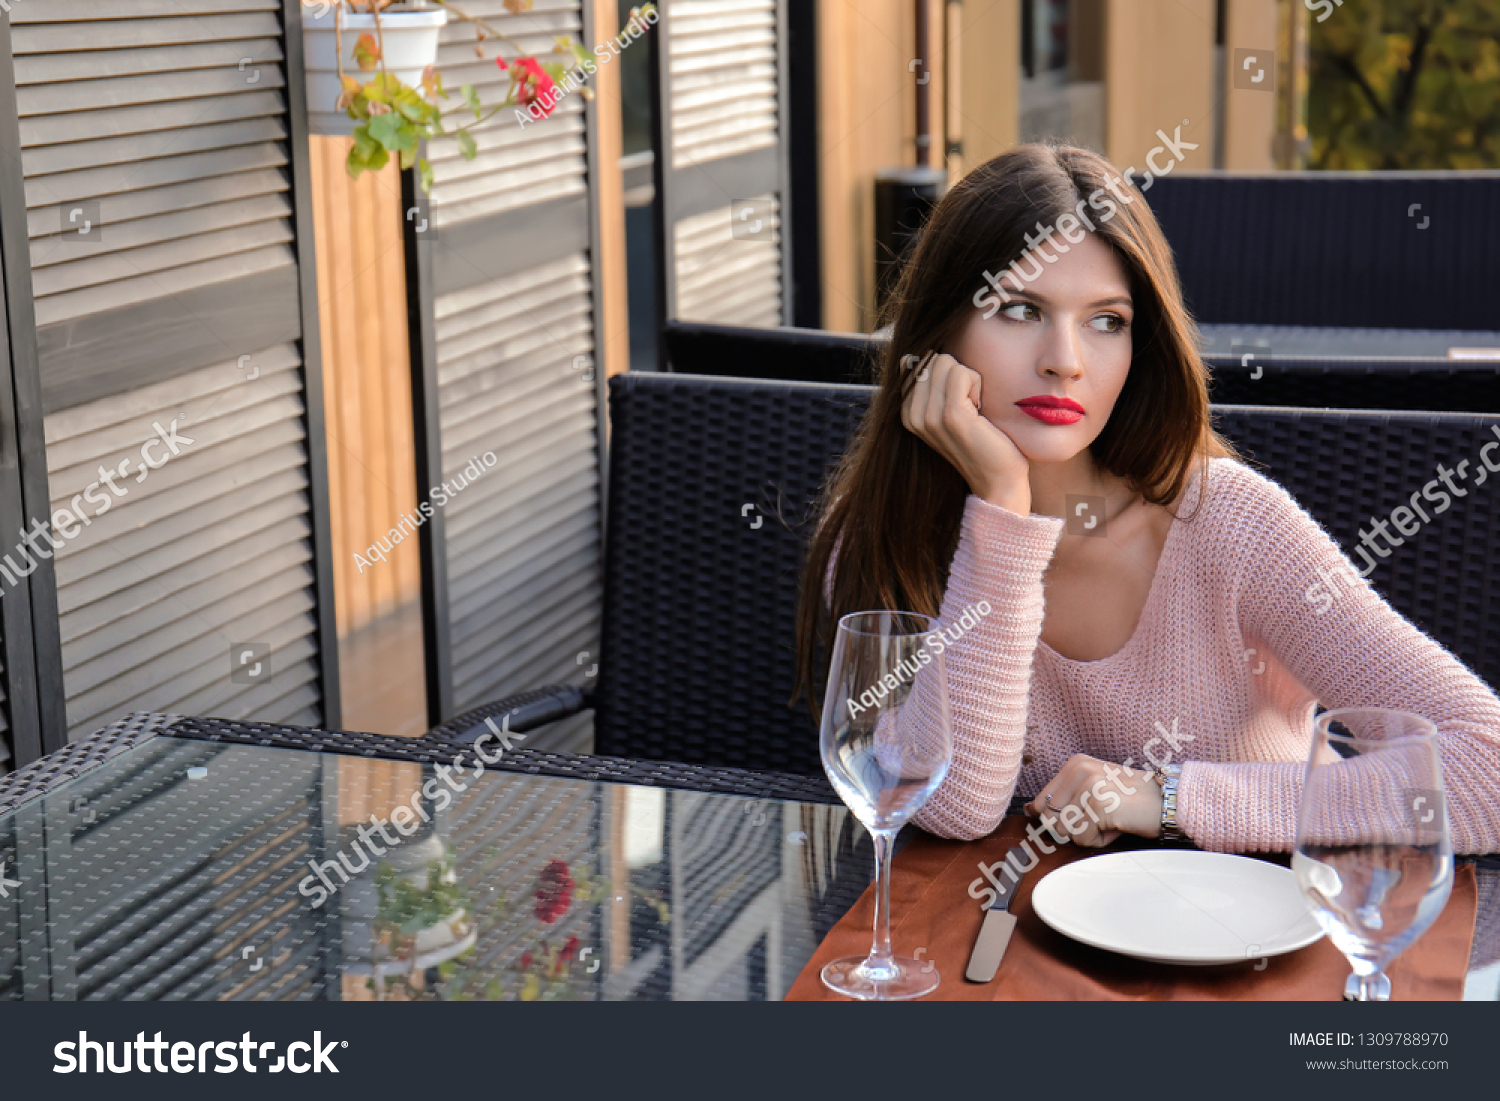 Young woman waiting for her boyfriend in cafe #1309788970